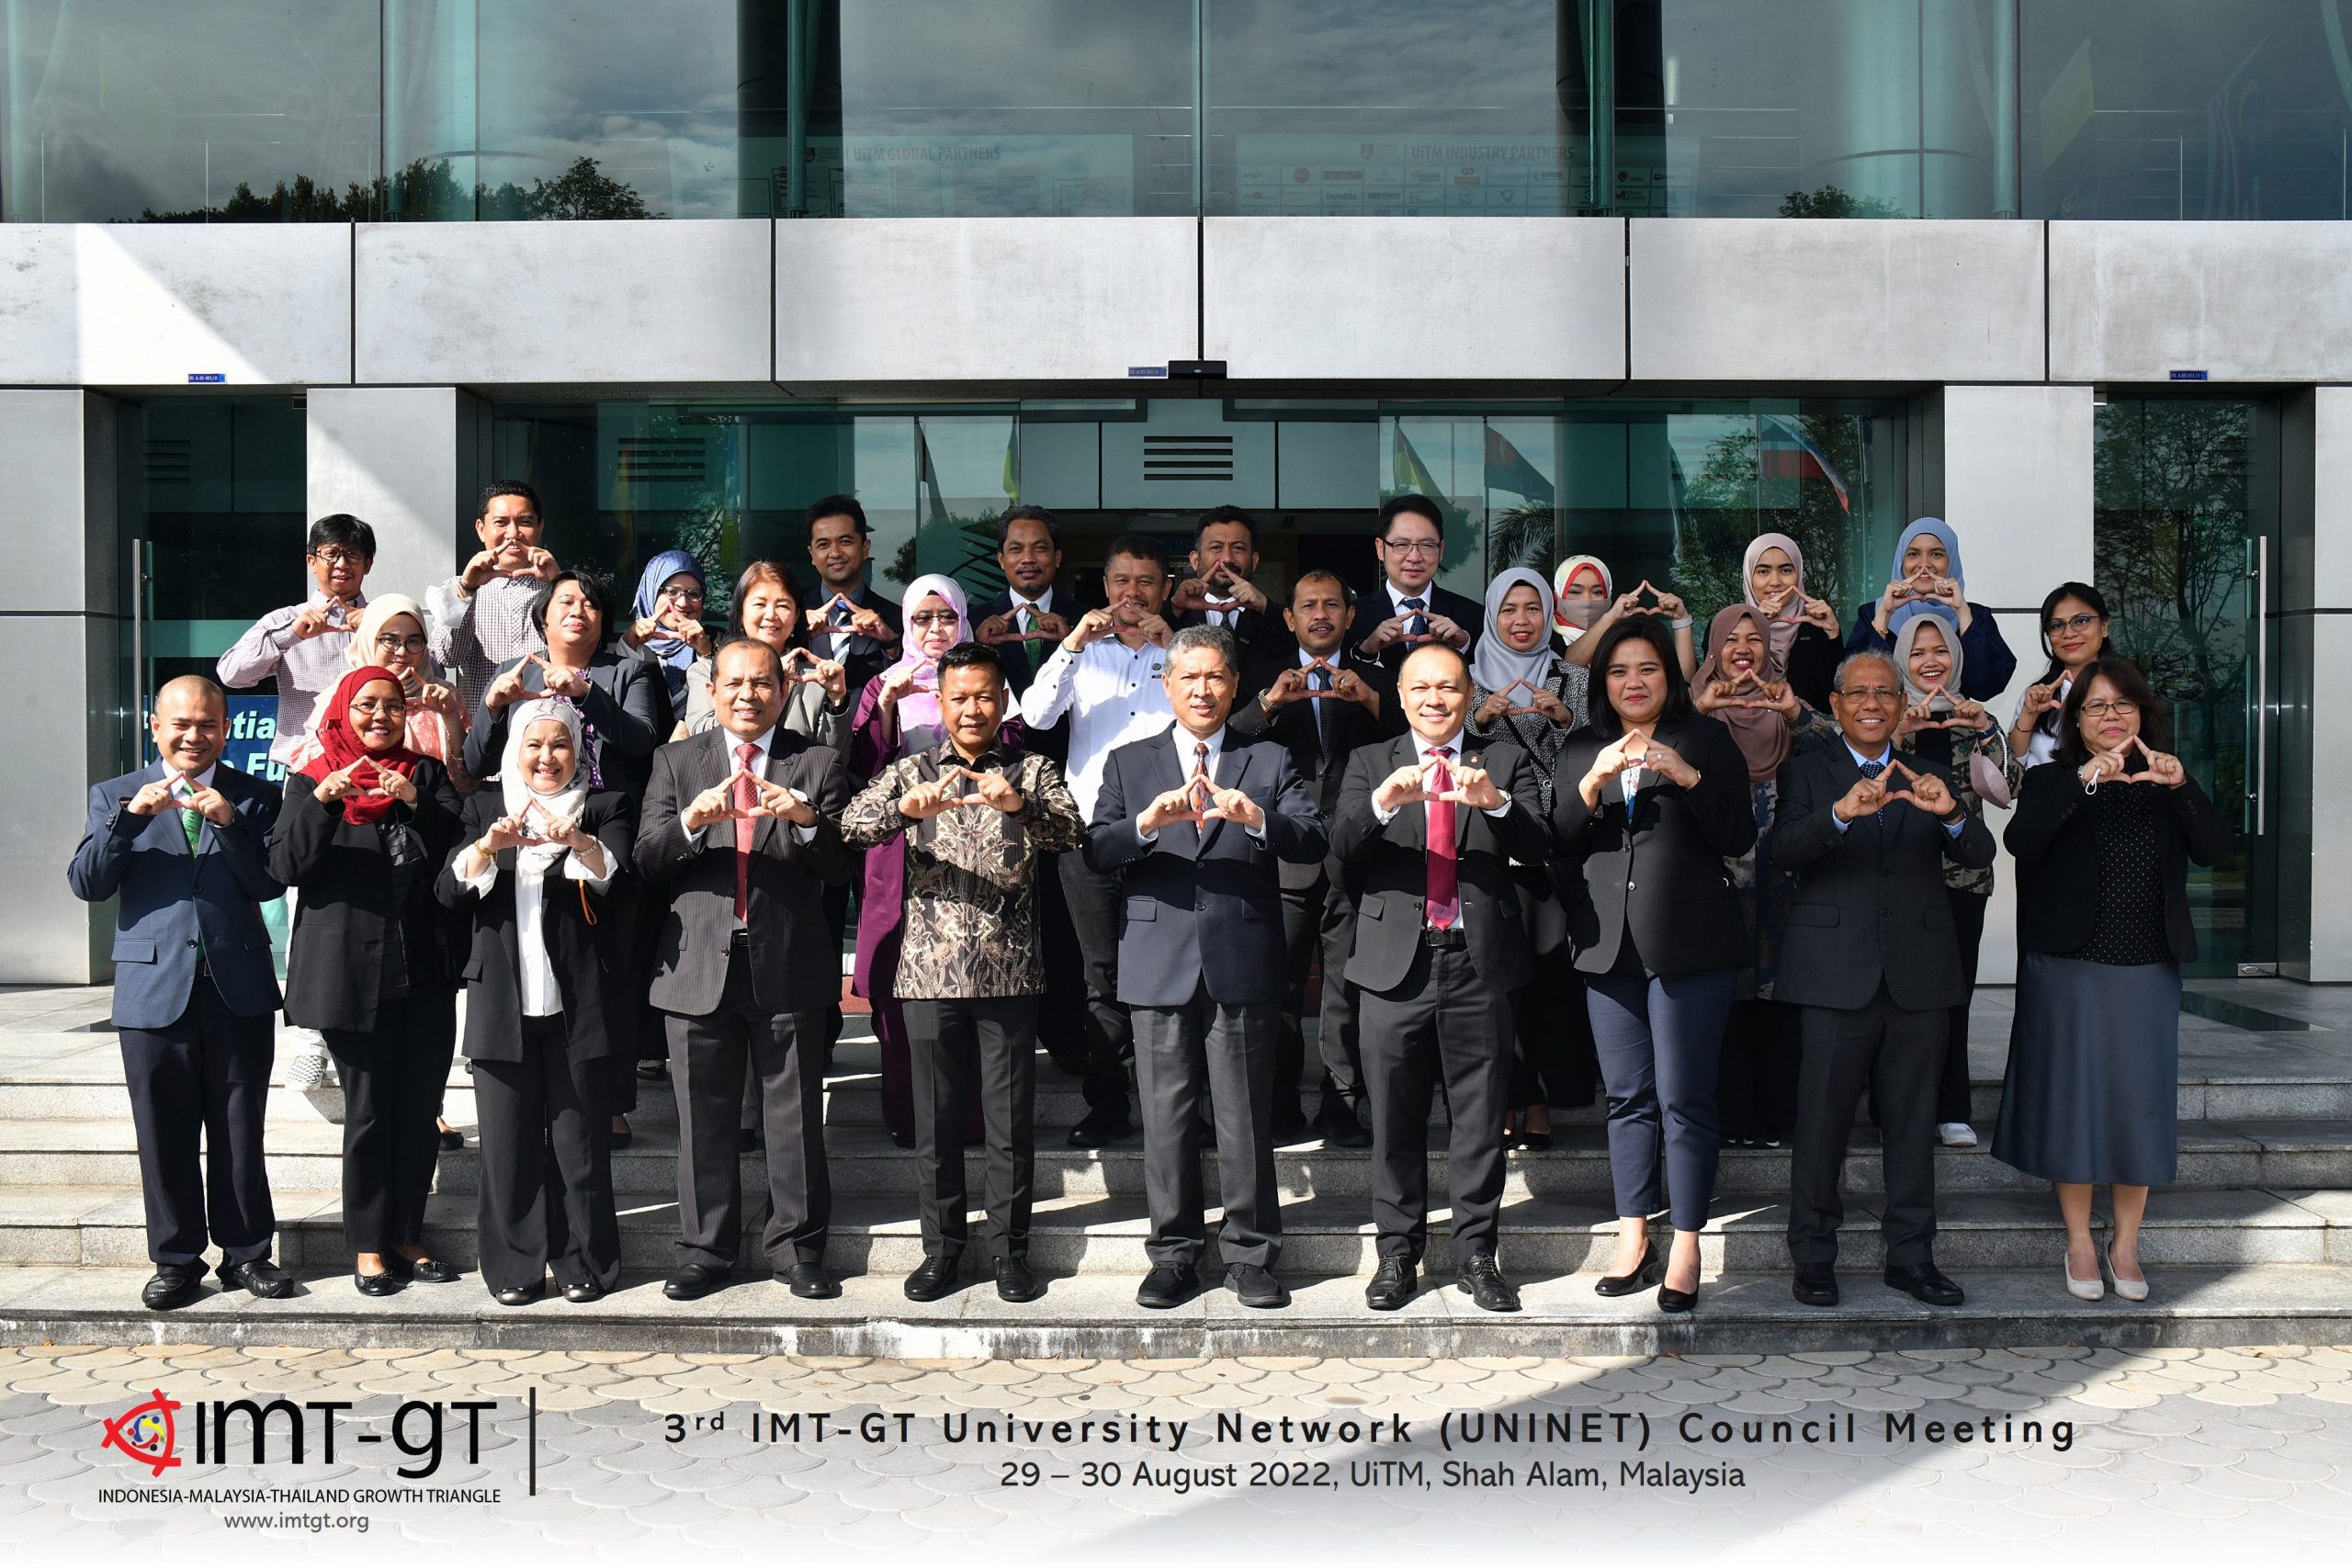 3rd IMT-GT UNIVERSITY NETWORK (UNINET) COUNCIL MEETING 29-30 AUGUST 2022, UiTM SHAH ALAM, MALAYSIA